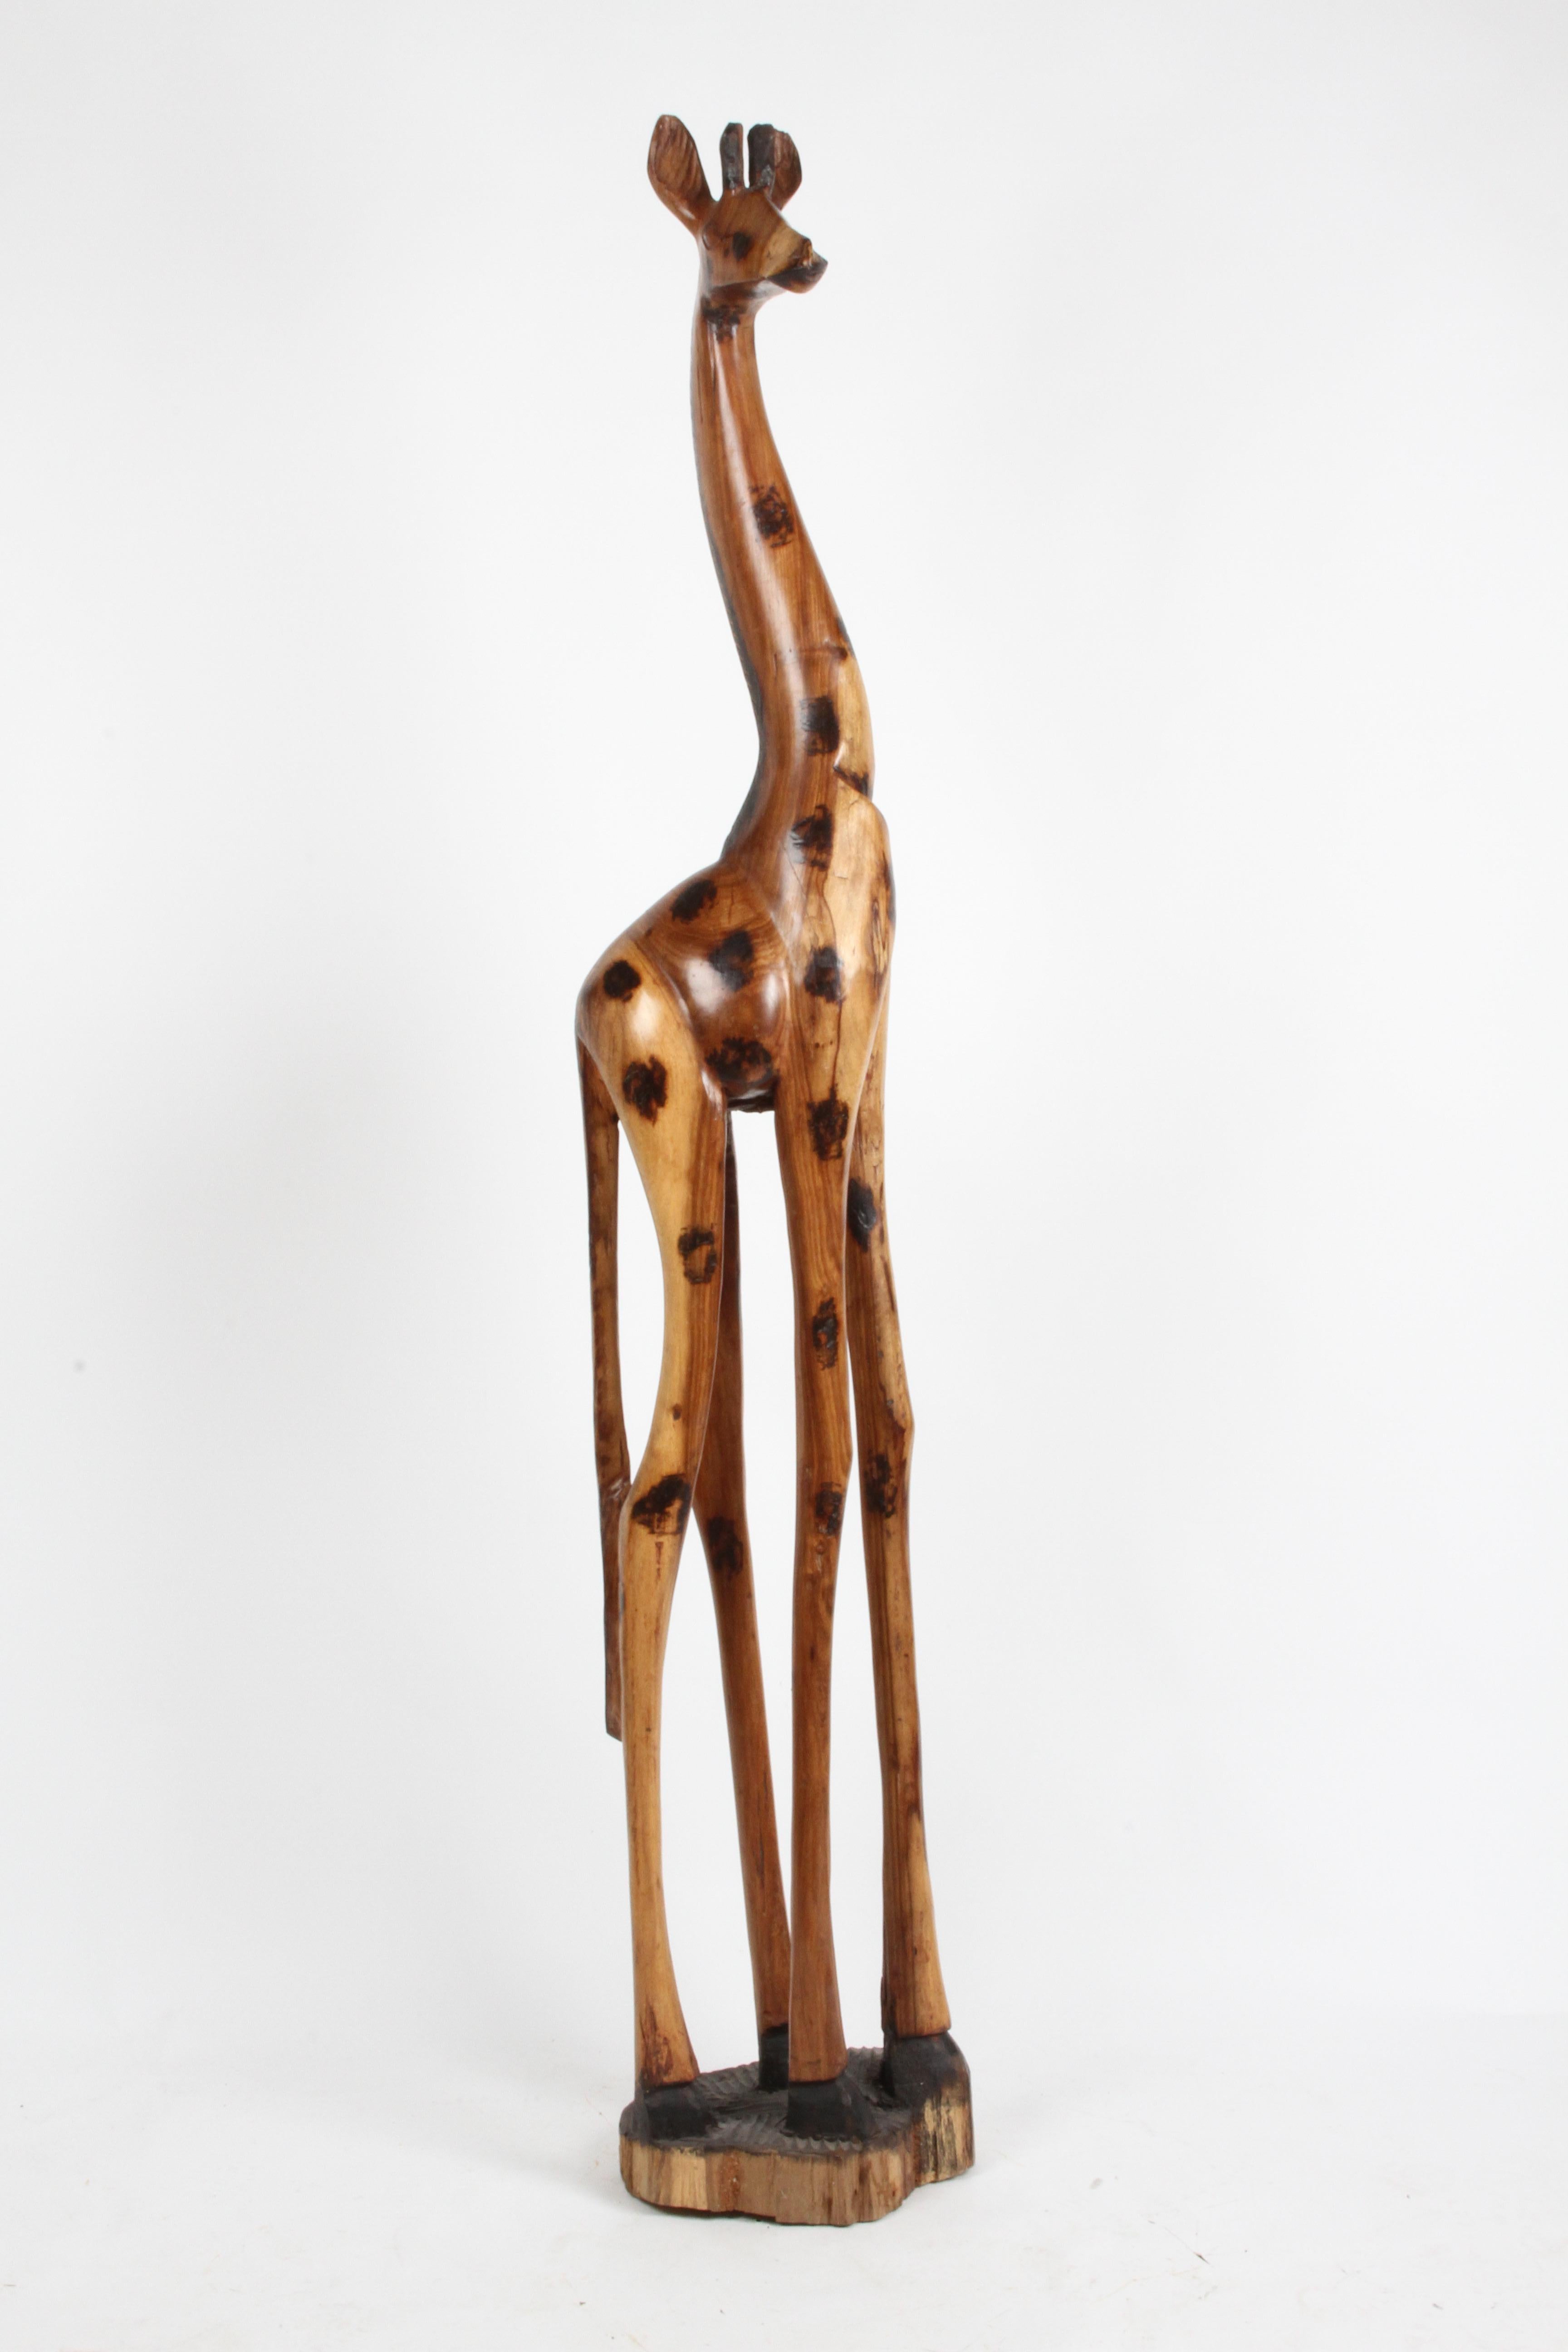 Grand scale African folk art hand carved wood giraffe, with charred black stained spots. Appears to be carved from log. In fine vintage condition. Unsigned. Measures: 80